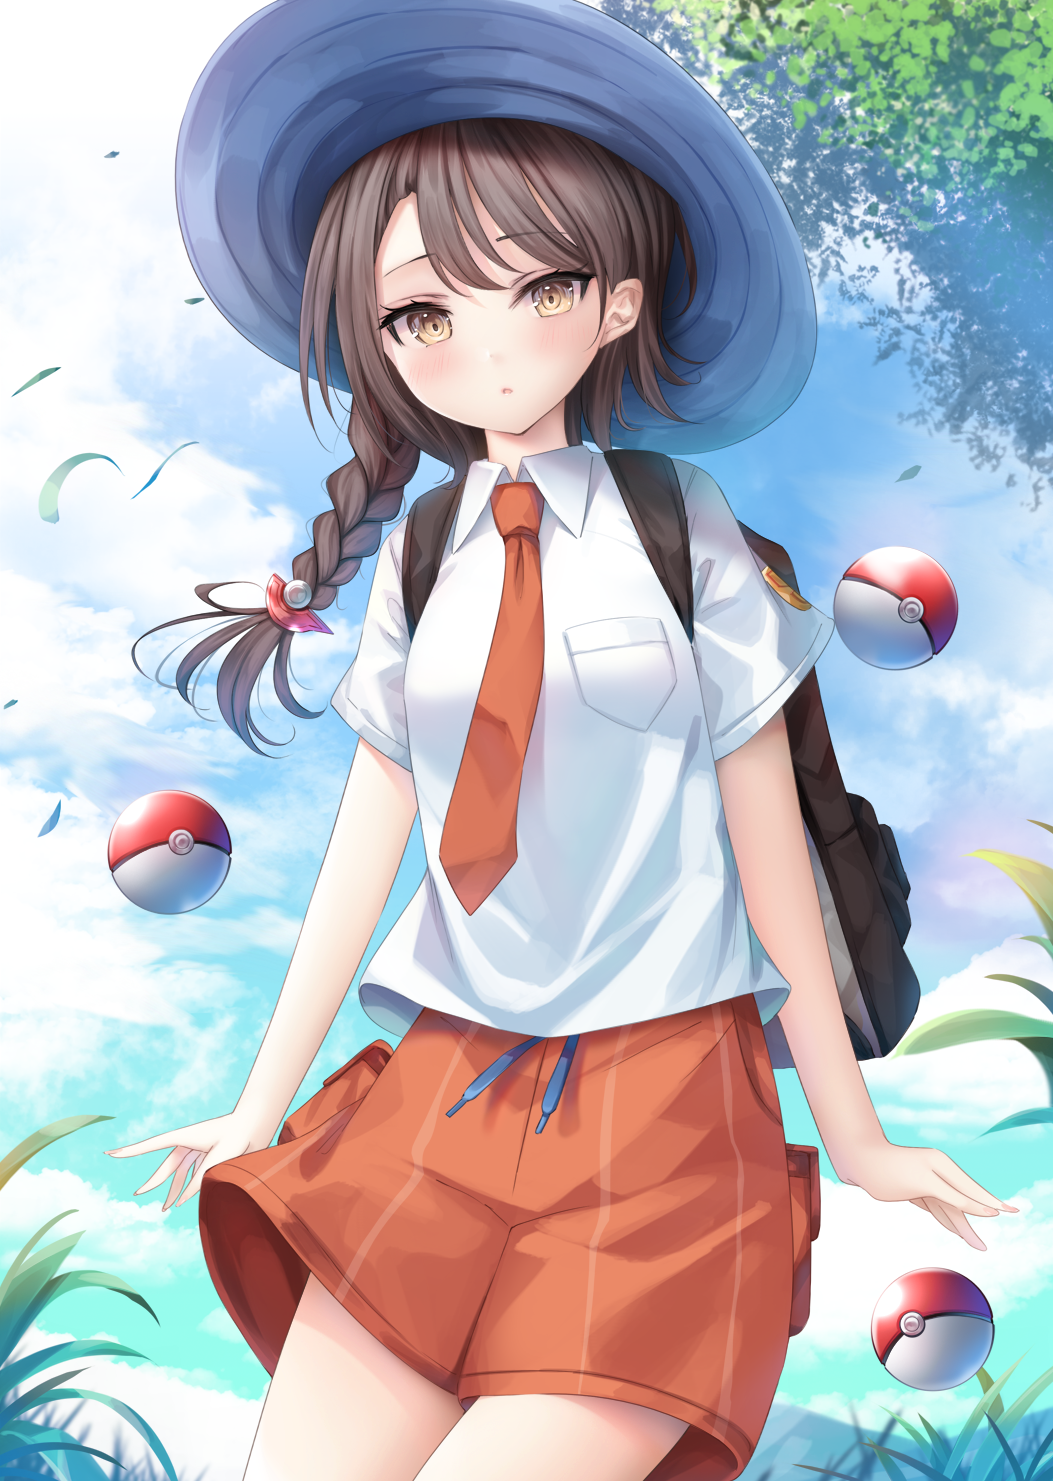 1girl backpack bag bangs blue_headwear blush braid brown_bag brown_eyes brown_hair clouds collared_shirt commentary_request day eyelashes female_protagonist_(pokemon_sv) grass hat highres leaves_in_wind long_hair looking_at_viewer murano necktie orange_necktie orange_shorts outdoors poke_ball poke_ball_(basic) pokemon pokemon_(game) pokemon_sv shirt short_sleeves shorts single_braid sky solo white_shirt